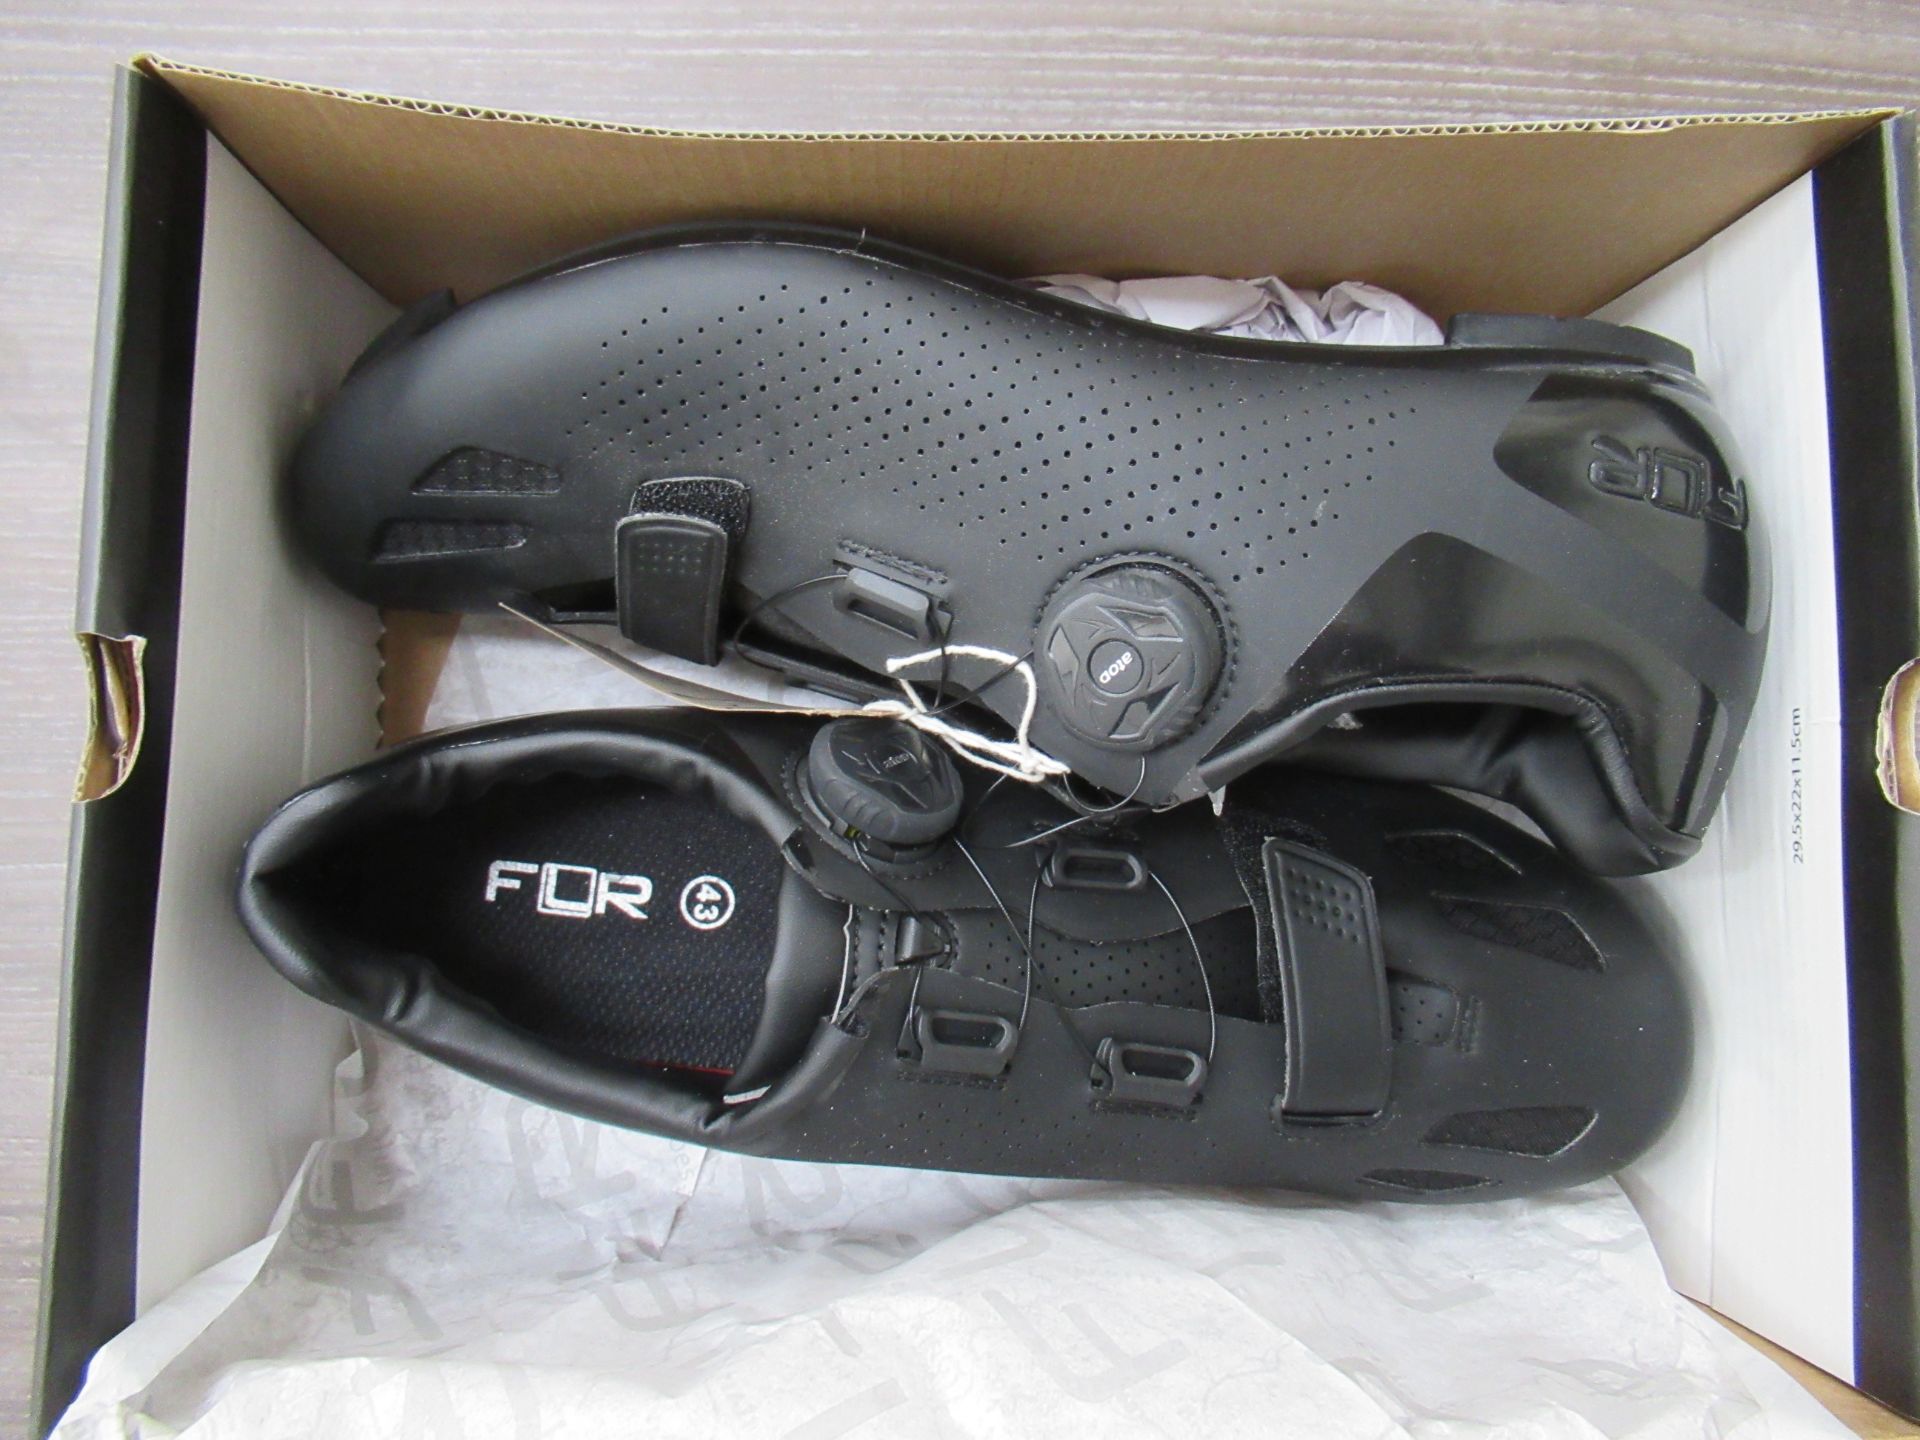 2 x Pairs of FLR cycling shoes - 1 x F-11 boxed EU size 43 (RRP£99.99) and 1 x F-35 III boxed EU siz - Image 3 of 7